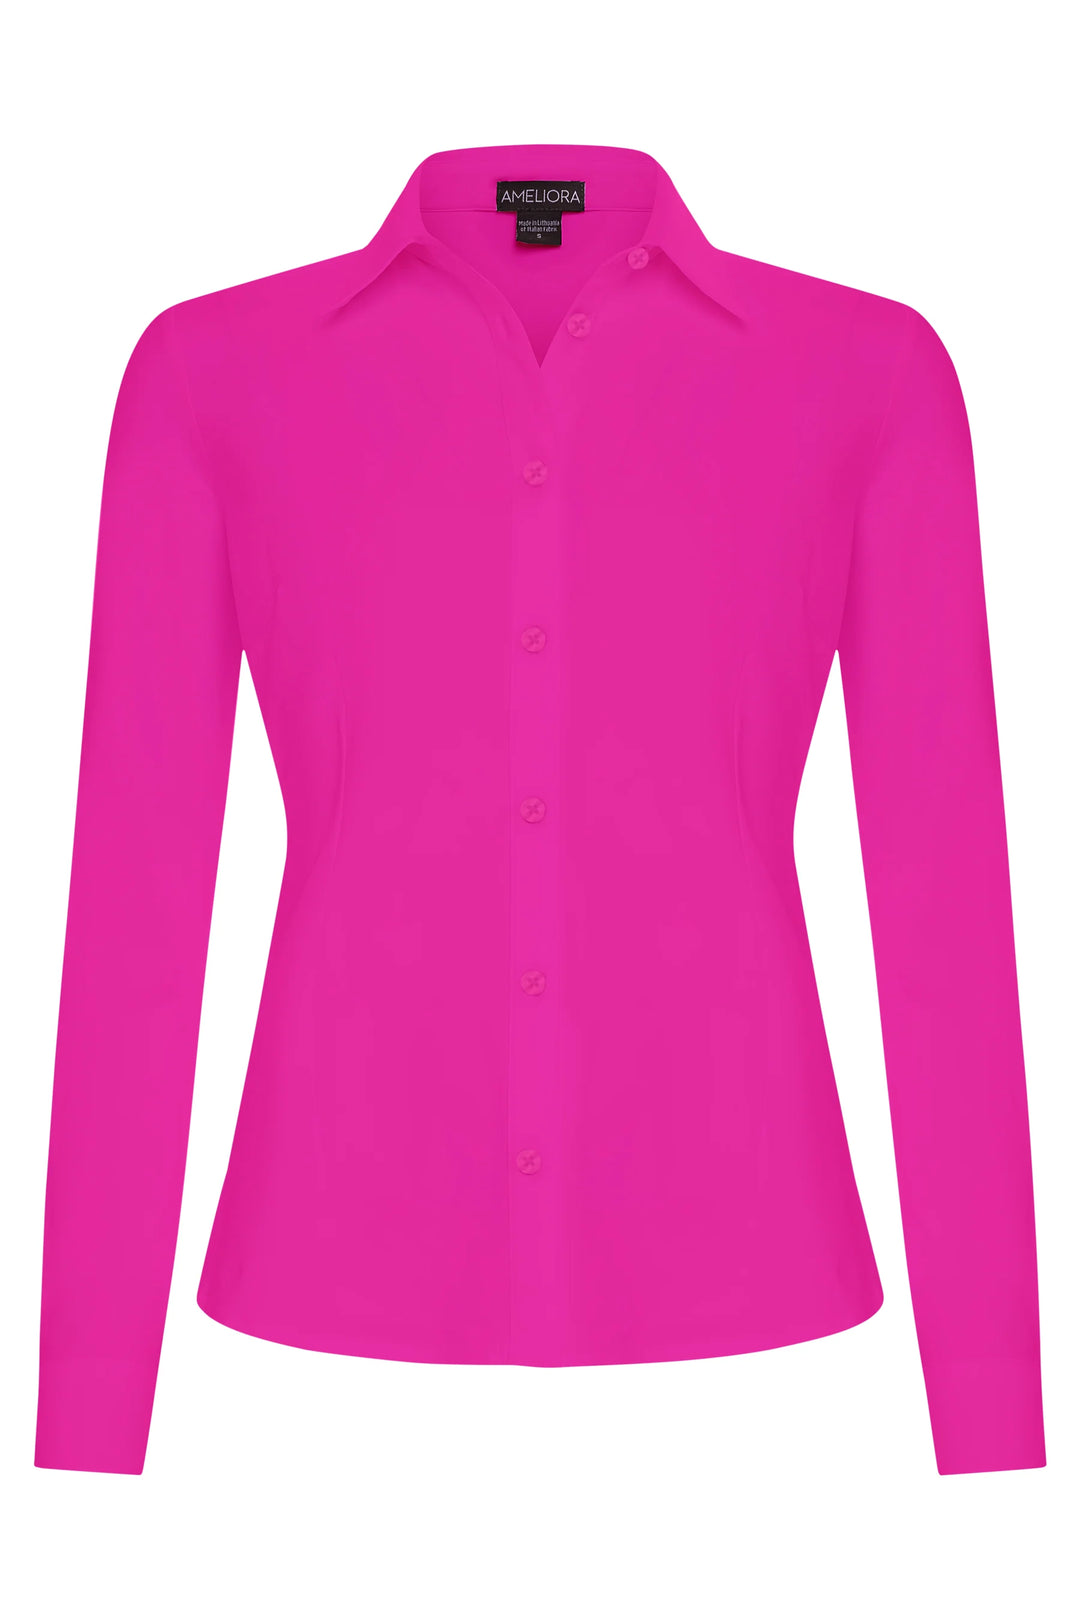 Dawn Long Sleeve Fitted Shirt in Hot Pink